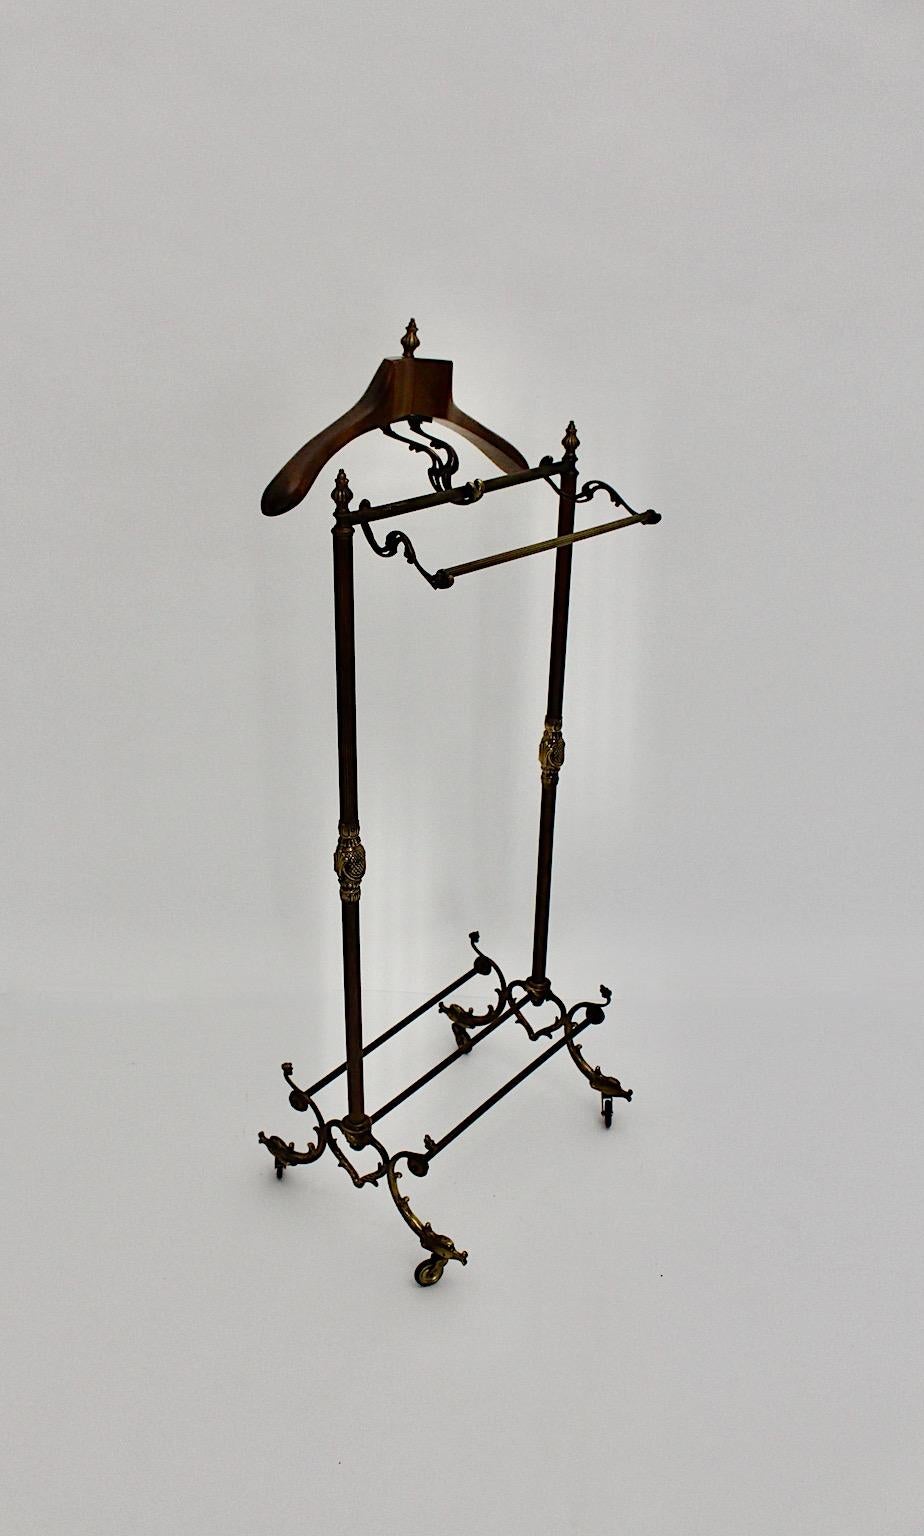 Baroque revival vintage valet or coat rack from brass and solid walnut circa 1890, United Kingdom.
A wonderful coat rack or valet from cast brass, partly blackened, and a hanger from solid walnut.
It is extraordinary and lush shape in superb